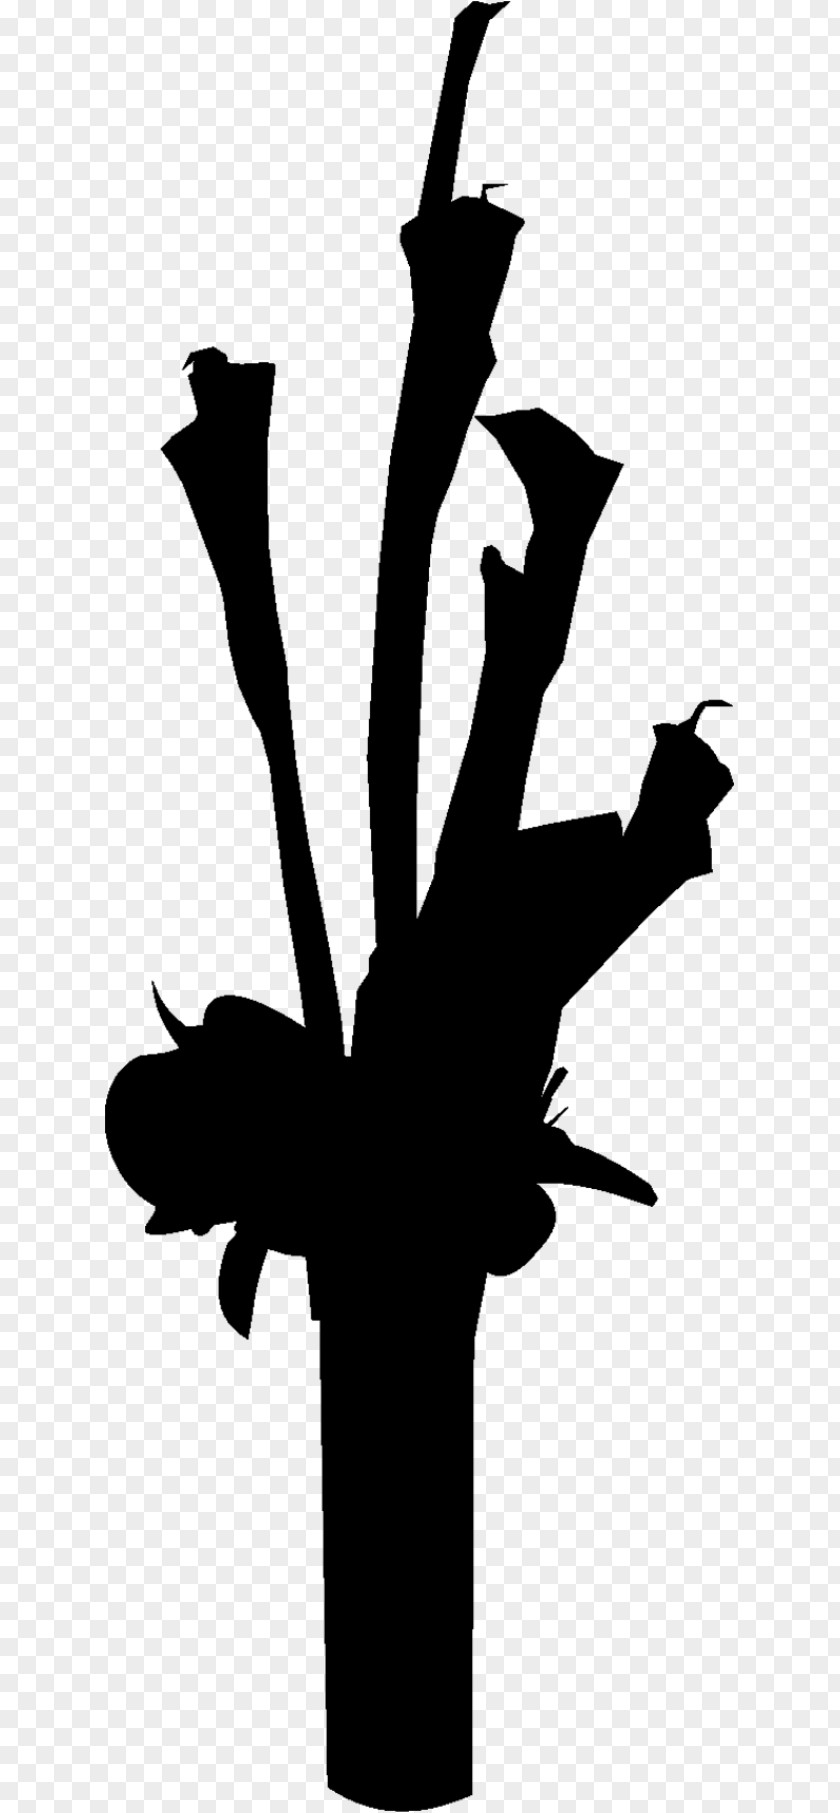 Clip Art Illustration Tree Silhouette Character PNG